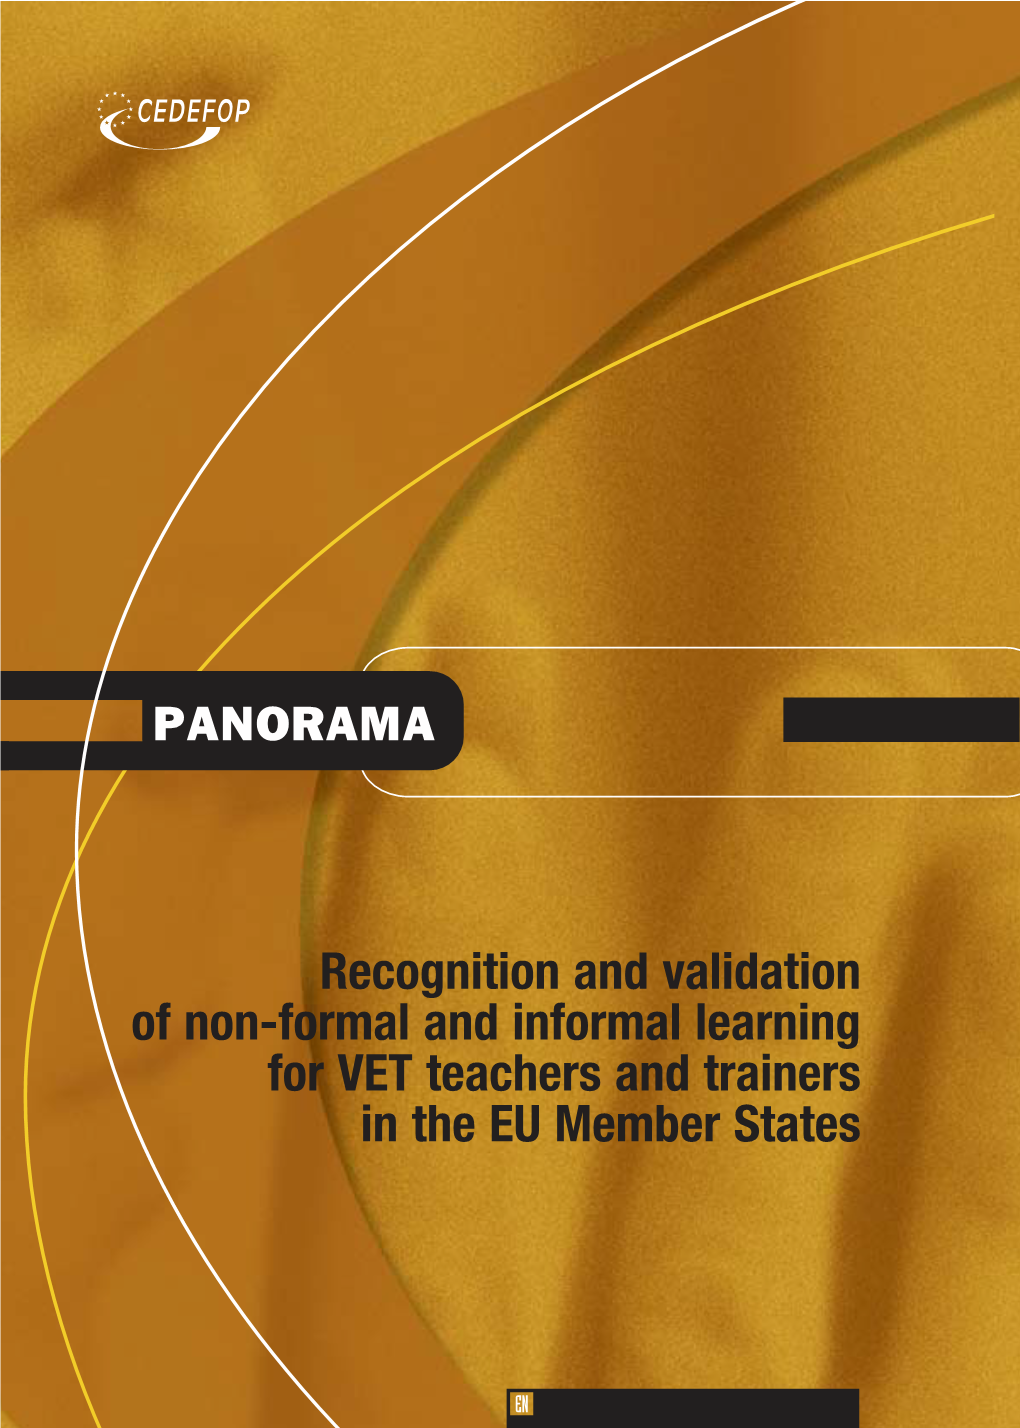 Recognition and Validation of Non-Formal and Informal Learning for VET Teachers and Trainers in the EU Member States